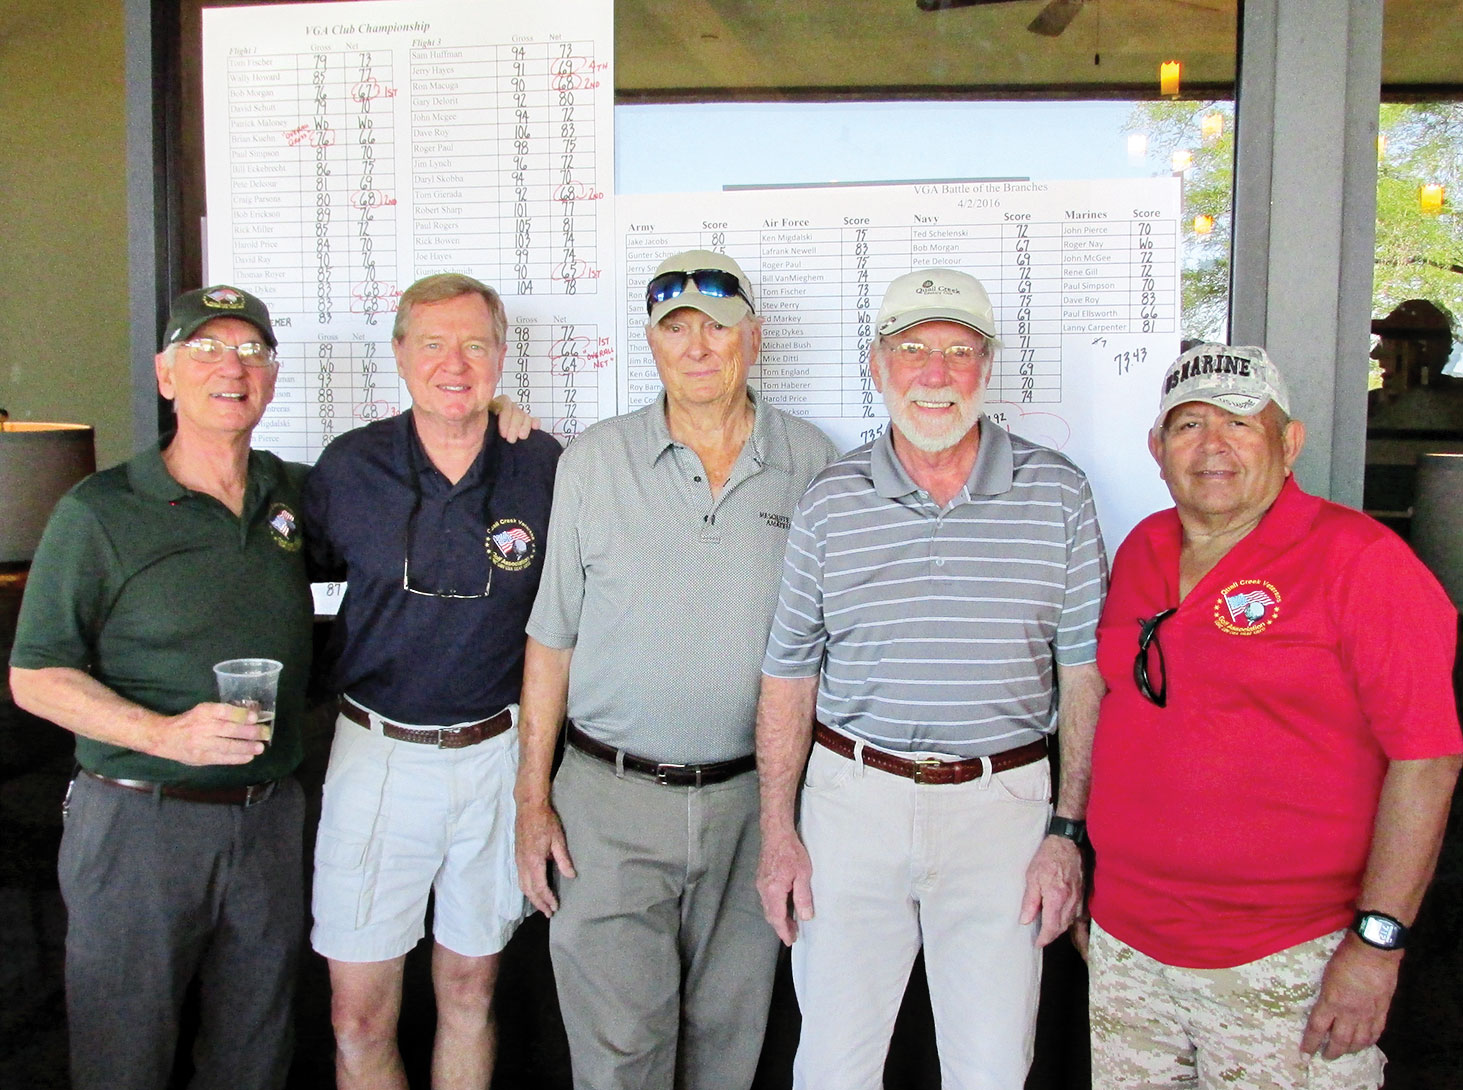 Gunter Schmidt, Tom Haberer, Brian Kuehn, Dave Burrows and tournament Chairman Rene Gill gather at the leader board following the tournament.